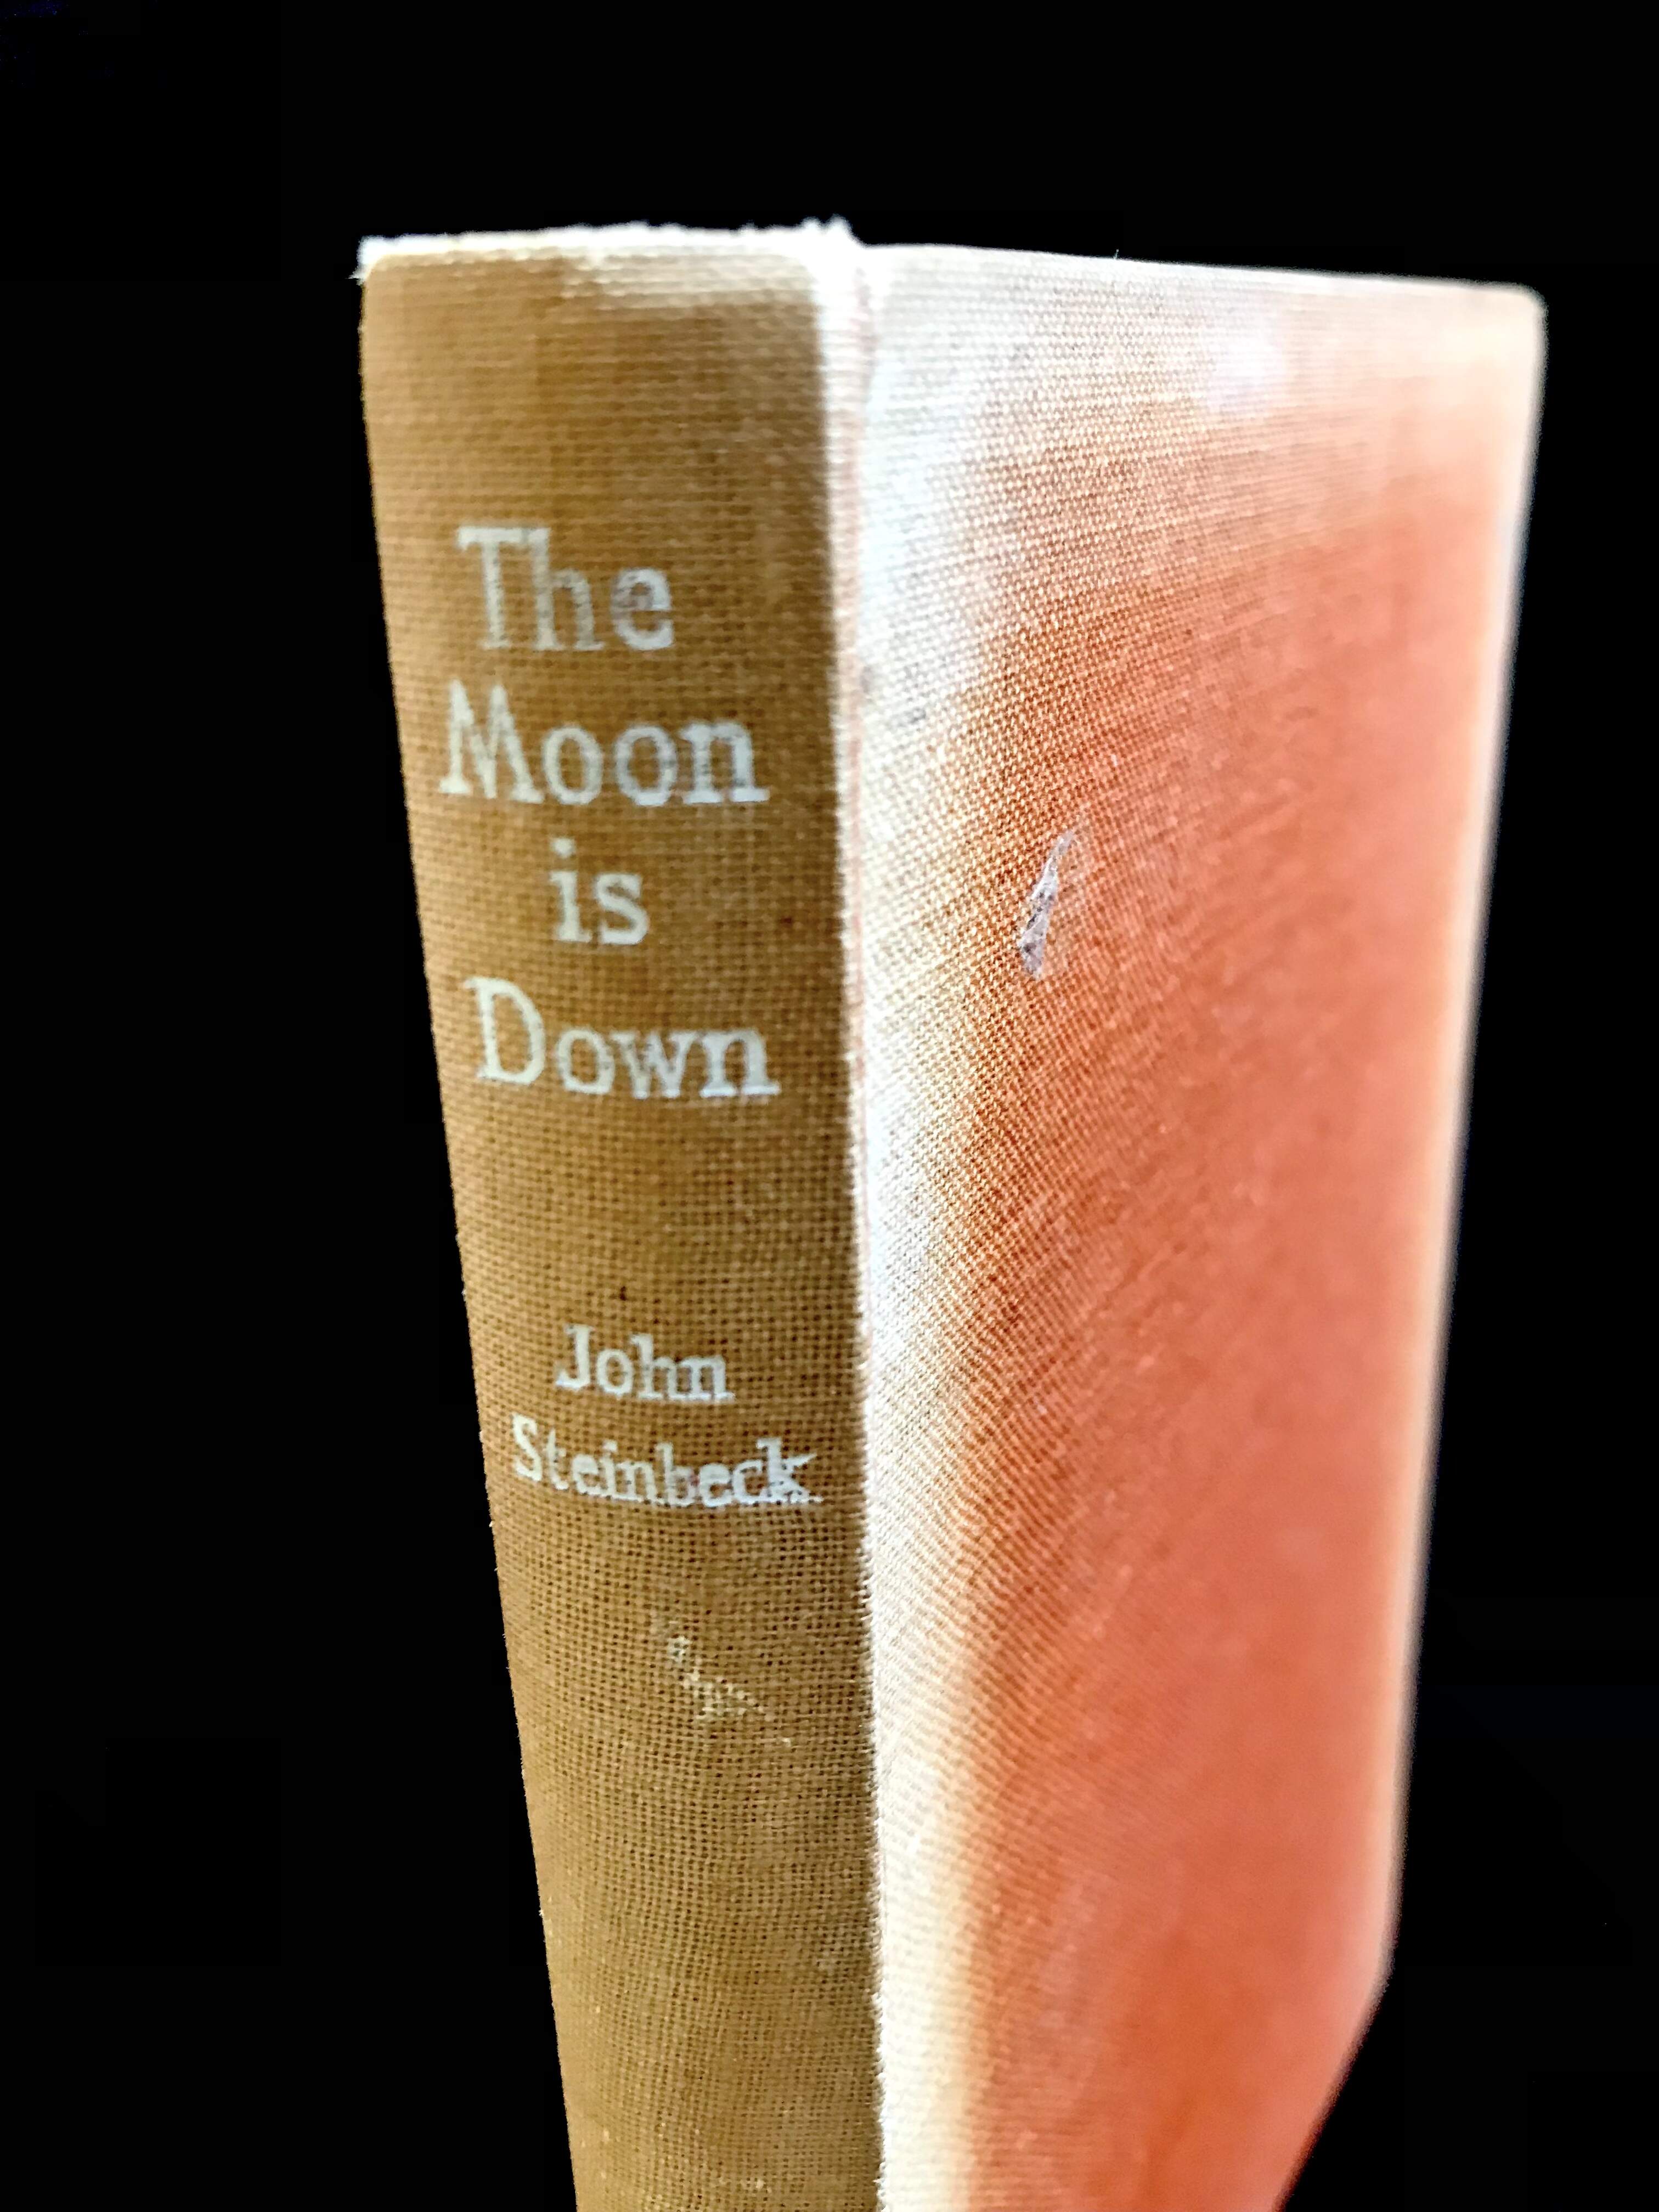 The Moon Is Down by John Steinbeck